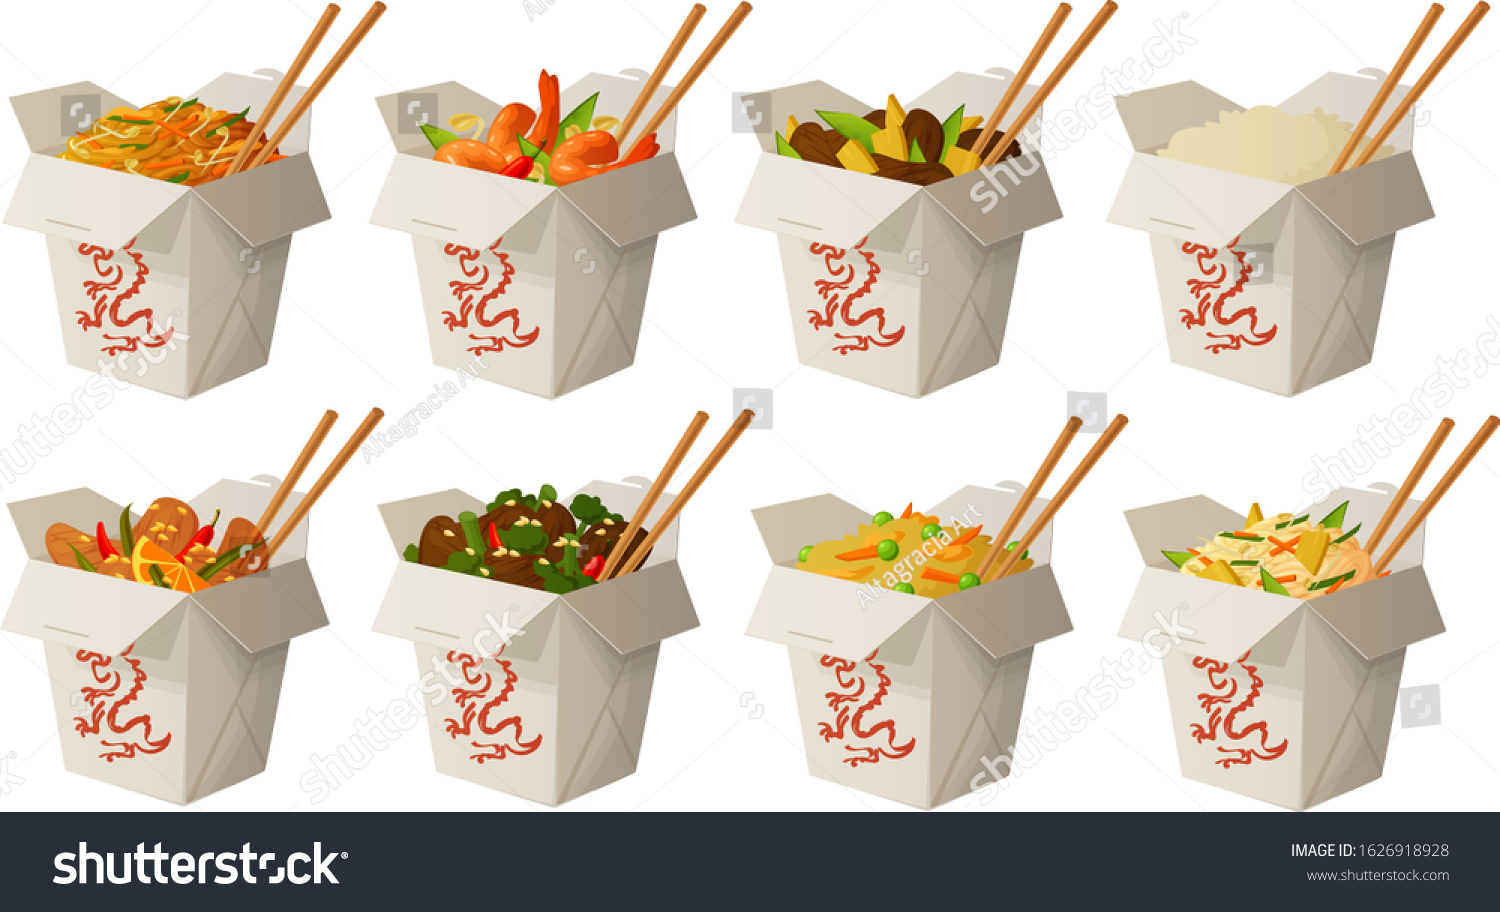 SVG of Vector illustration of various Asian Chinese take out foods in boxes. svg